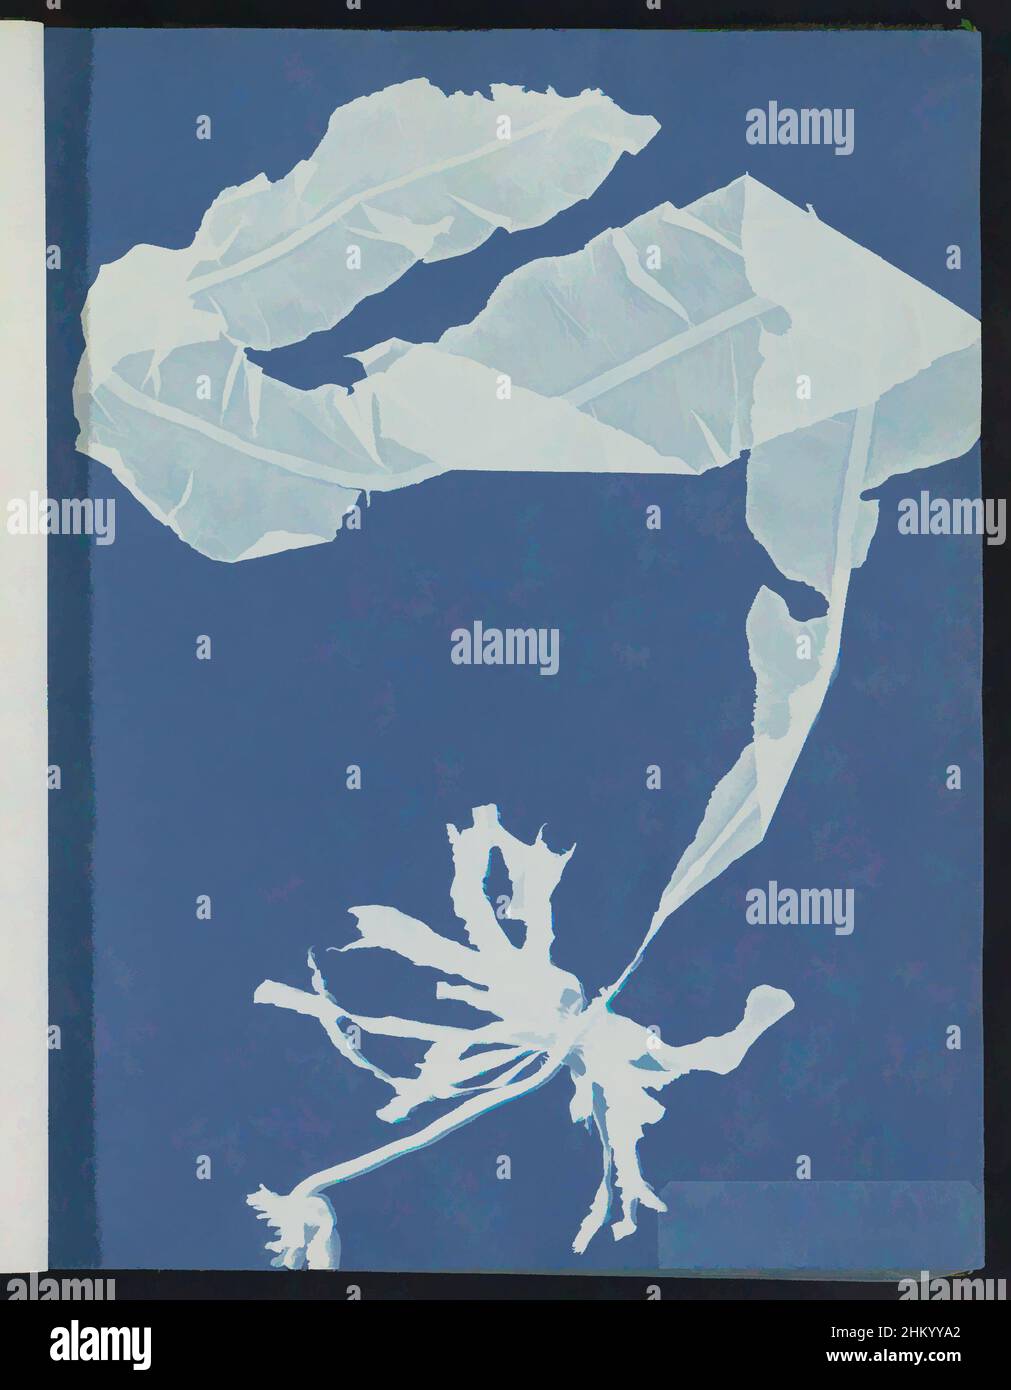 Art inspired by Alaria esculenta, Anna Atkins, United Kingdom, c. 1843 - c. 1853, photographic support, cyanotype, height 250 mm × width 200 mm, Classic works modernized by Artotop with a splash of modernity. Shapes, color and value, eye-catching visual impact on art. Emotions through freedom of artworks in a contemporary way. A timeless message pursuing a wildly creative new direction. Artists turning to the digital medium and creating the Artotop NFT Stock Photo